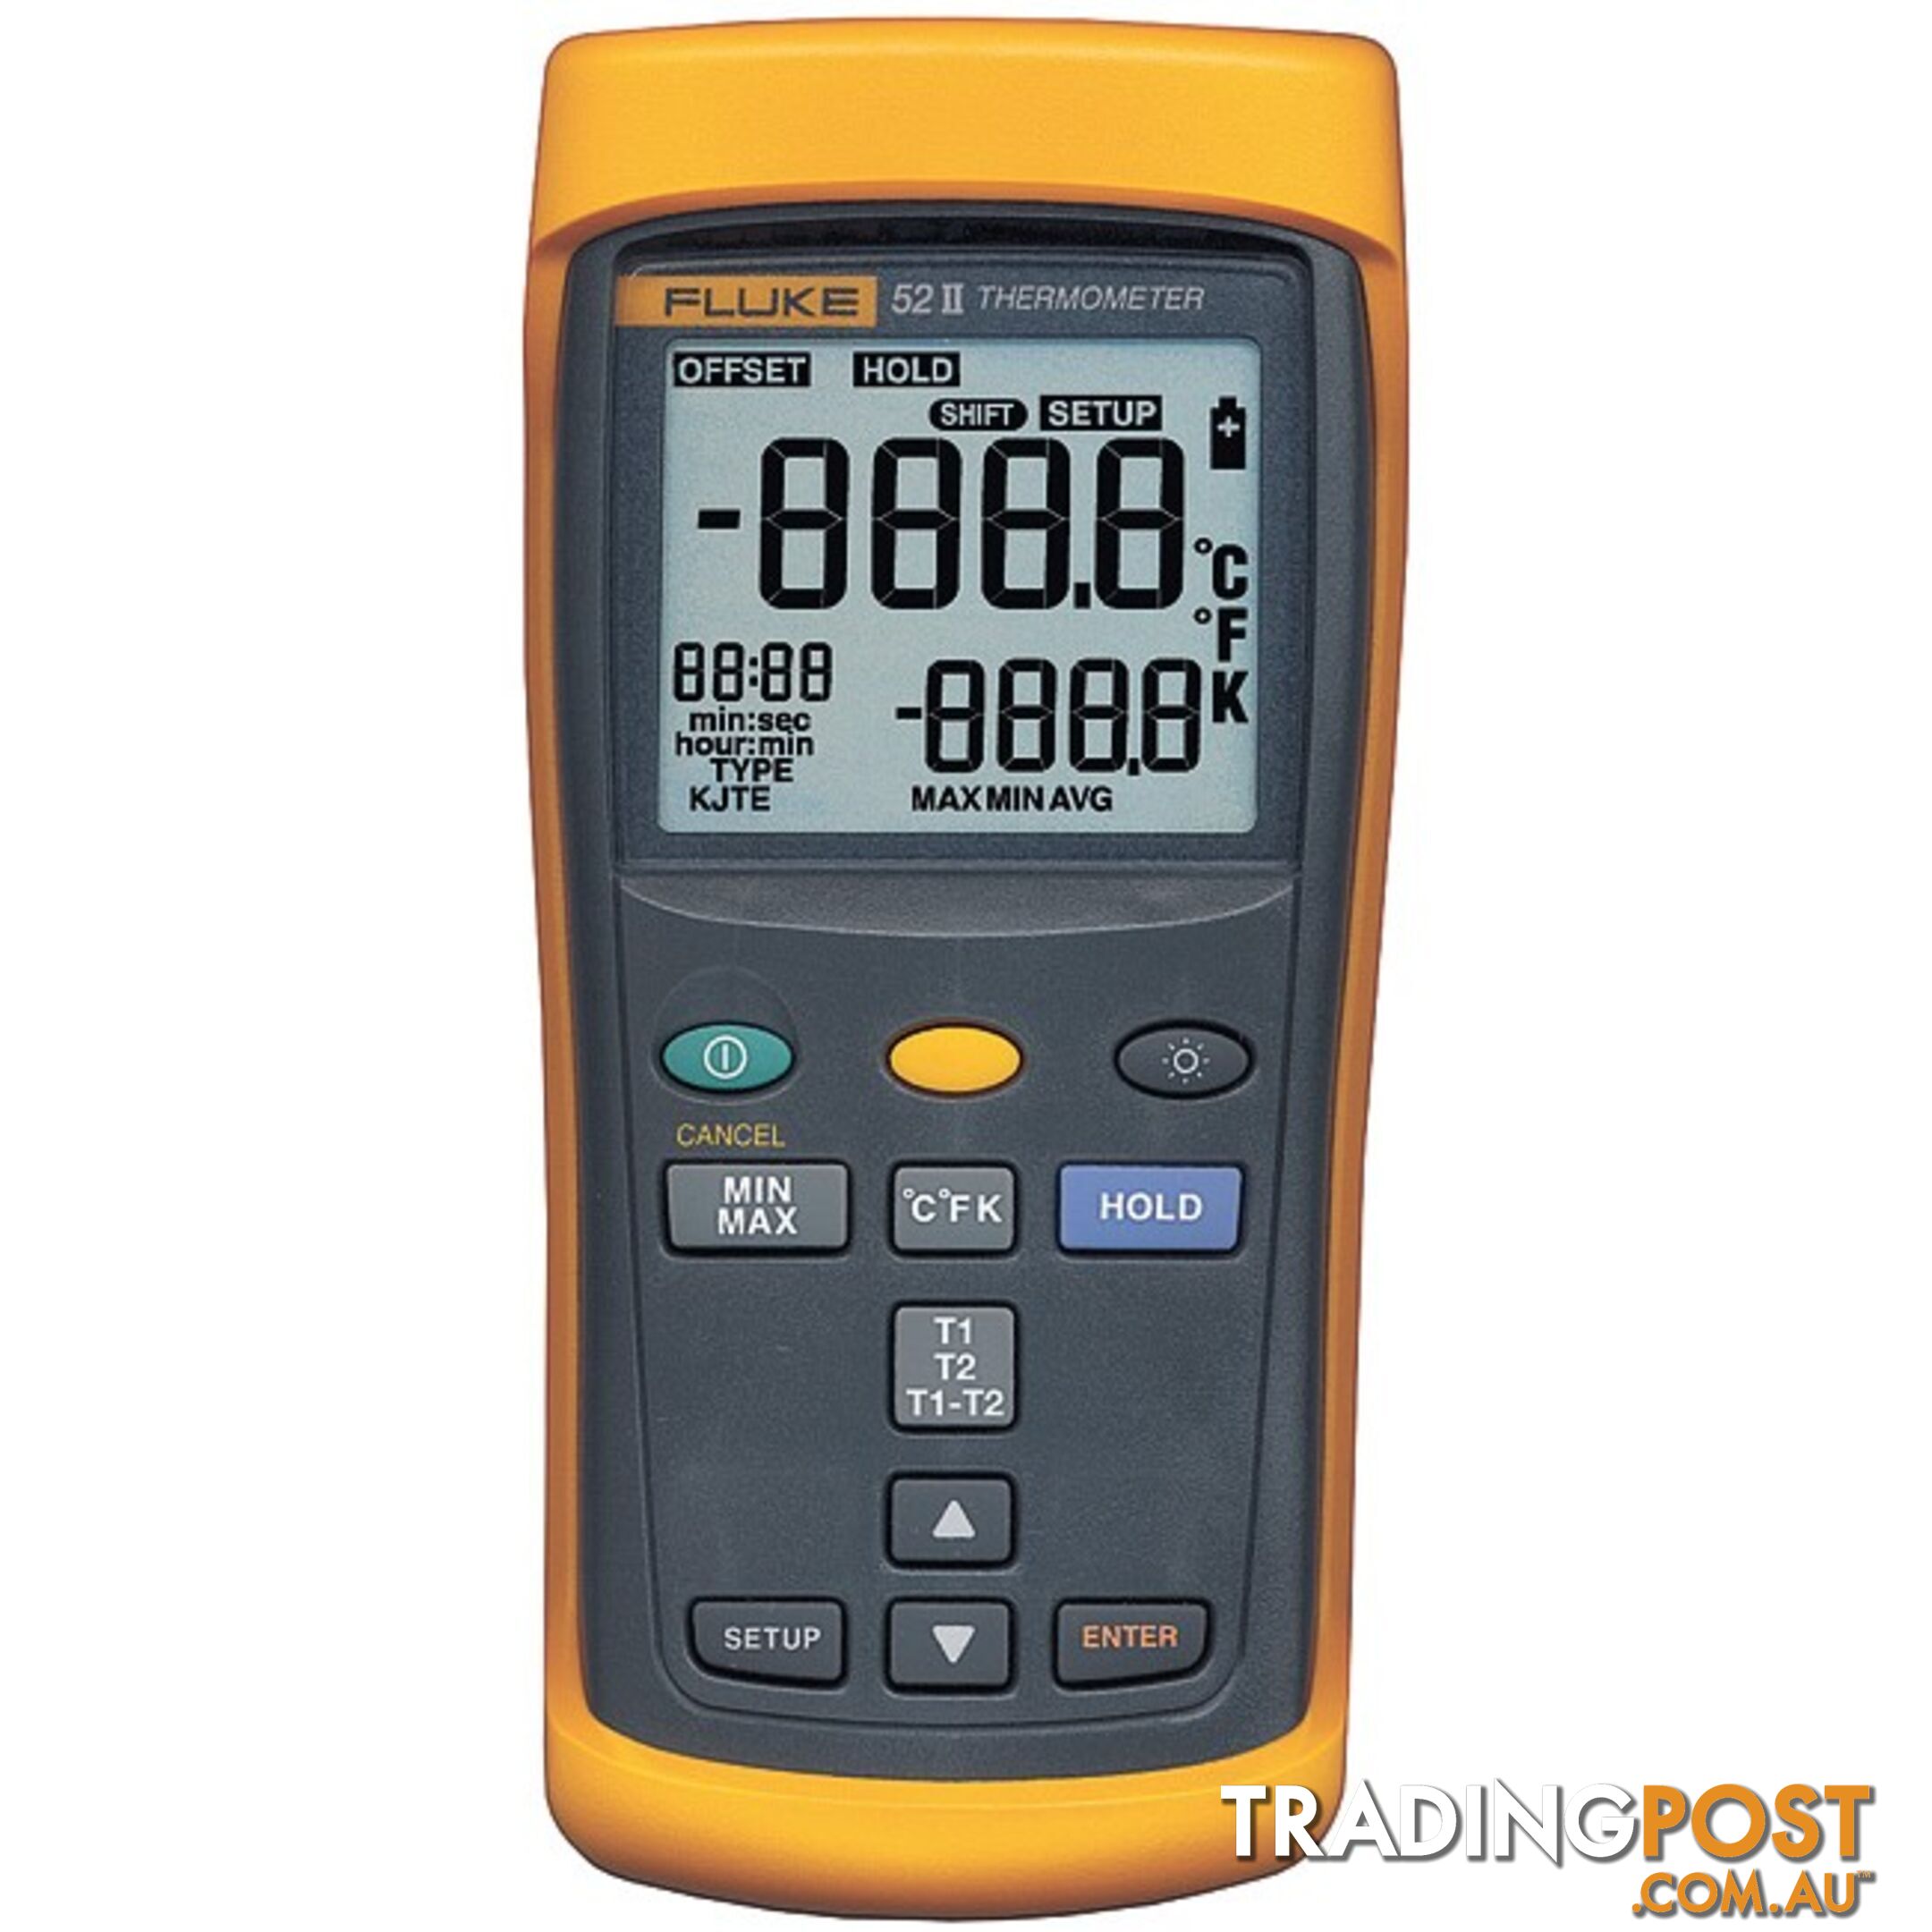 52-IIF DUAL INPUT THERMOMETER - FLUKE TRUE DIFFERENTIAL